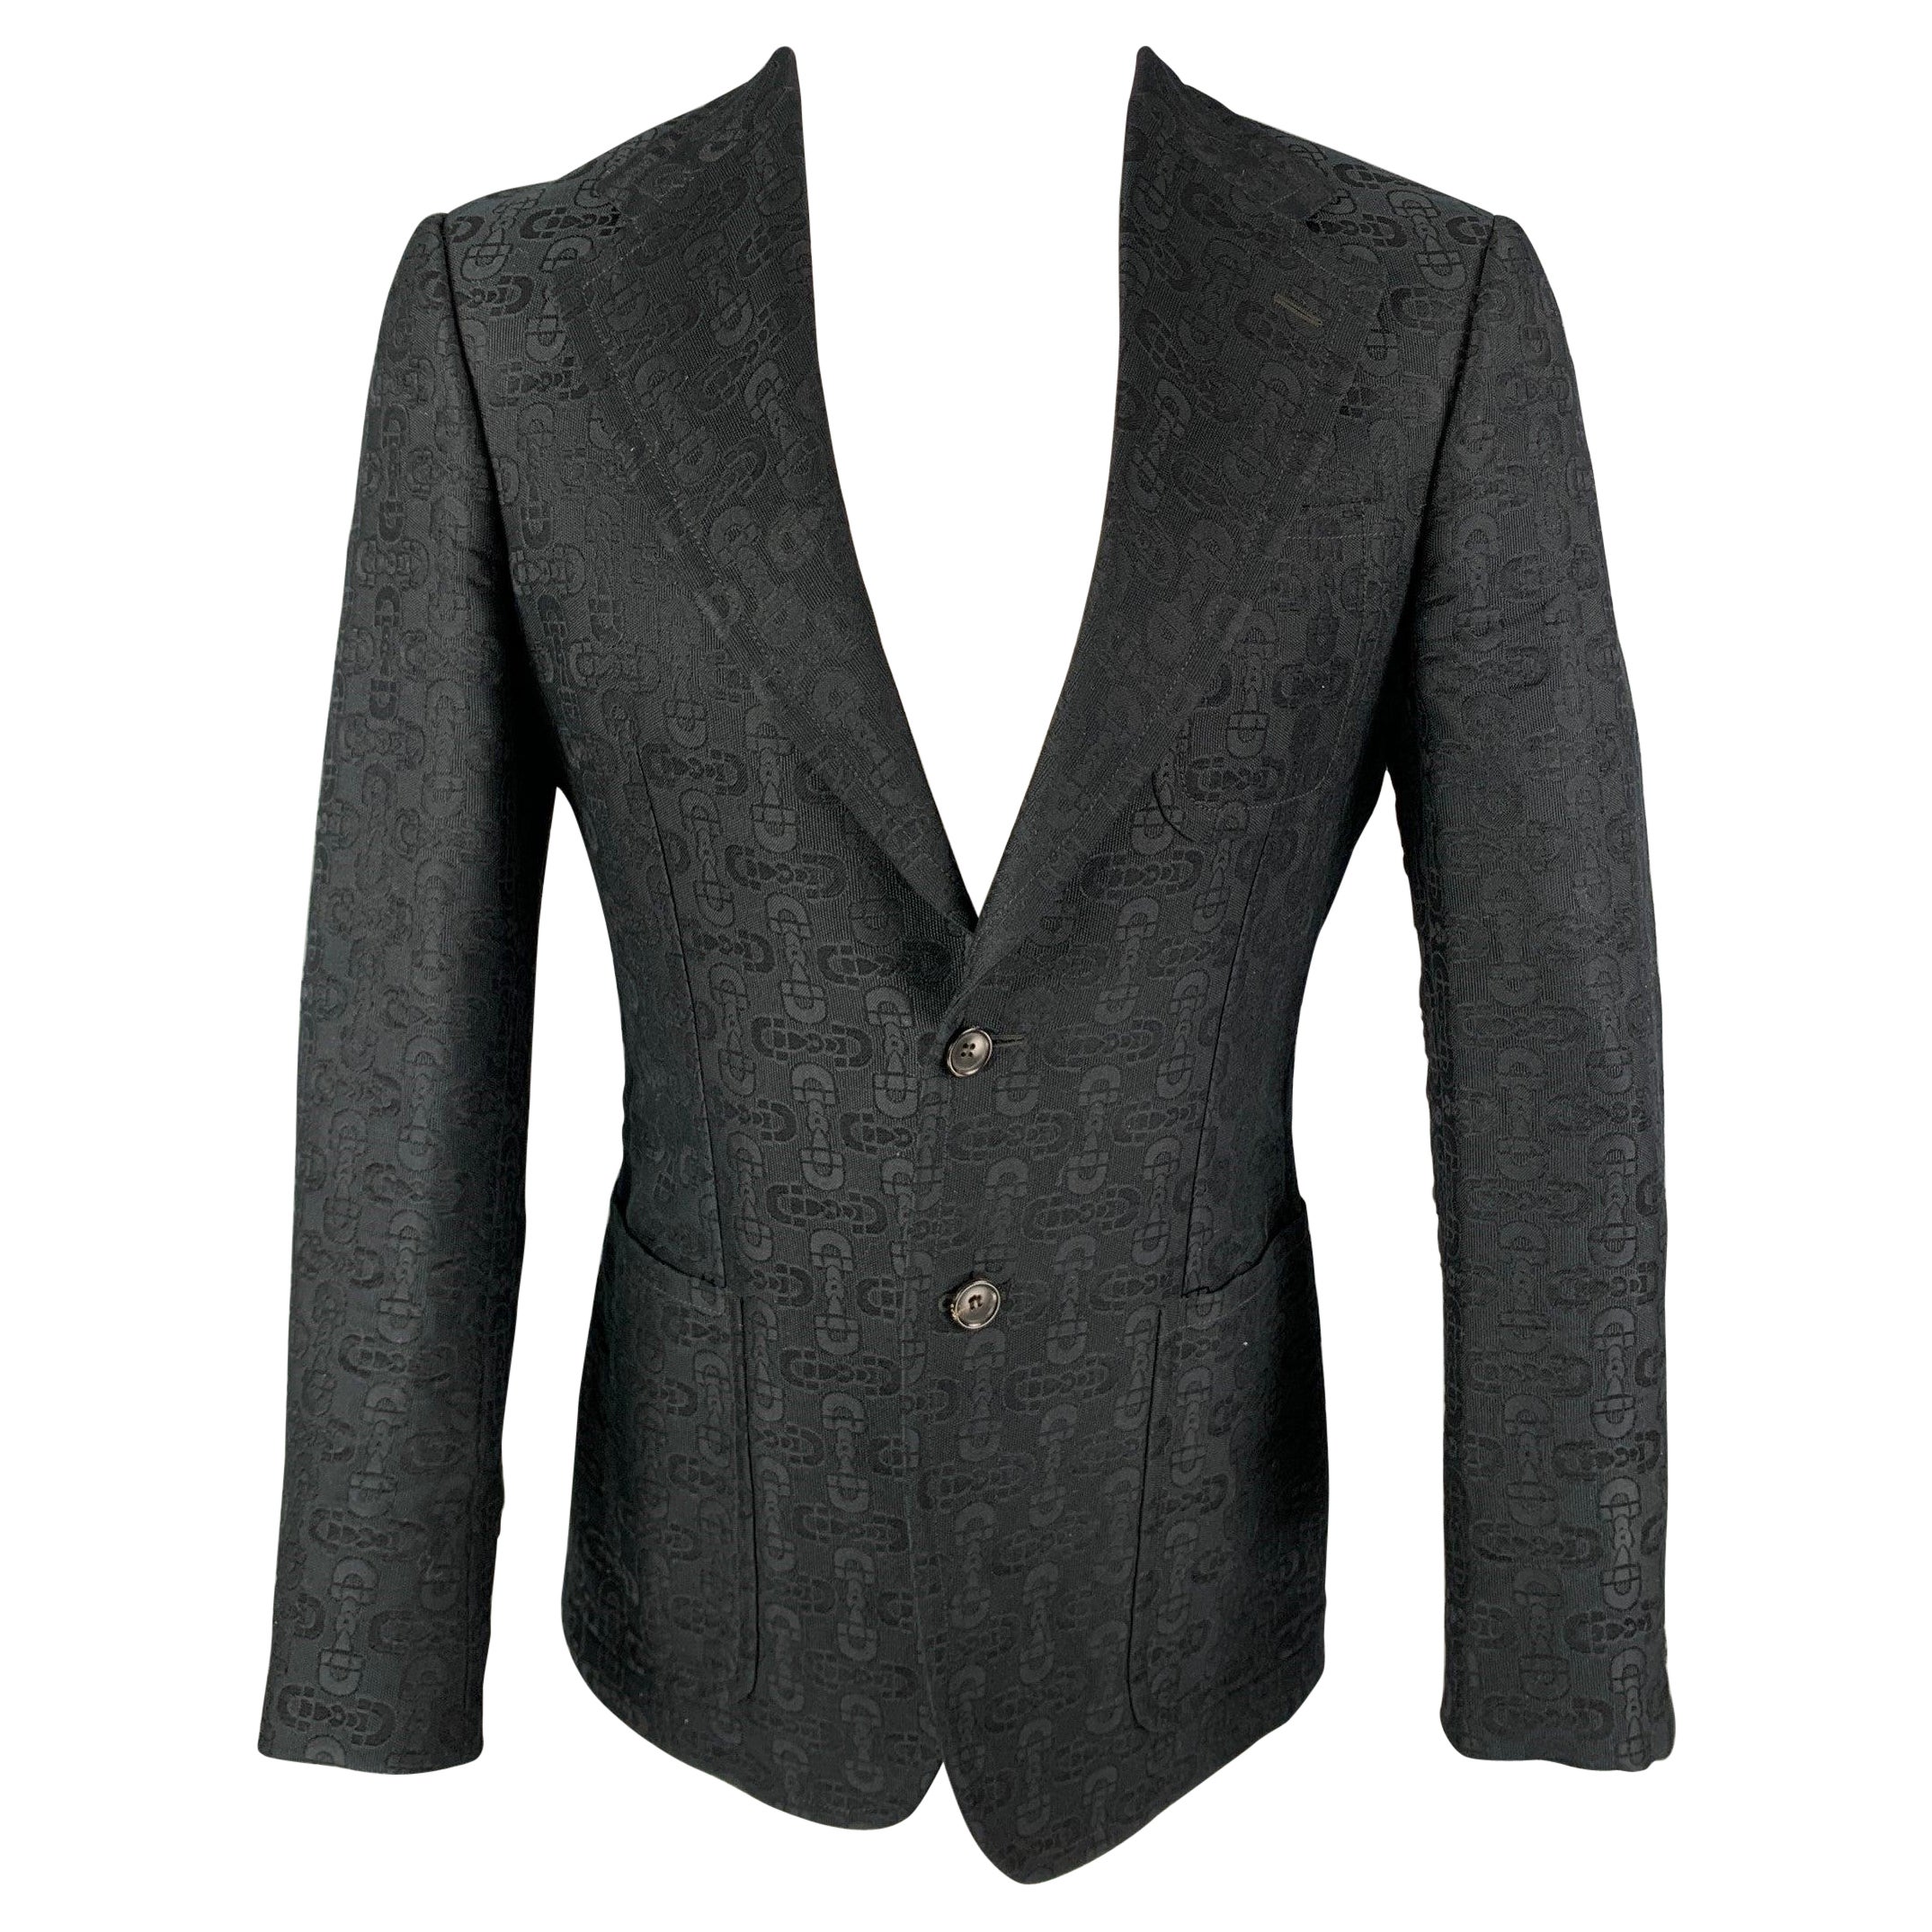 GUCCI by TOM FORD Size 36 Black Jacquard Cotton Silk Notch Lapel Sport Coat For Sale